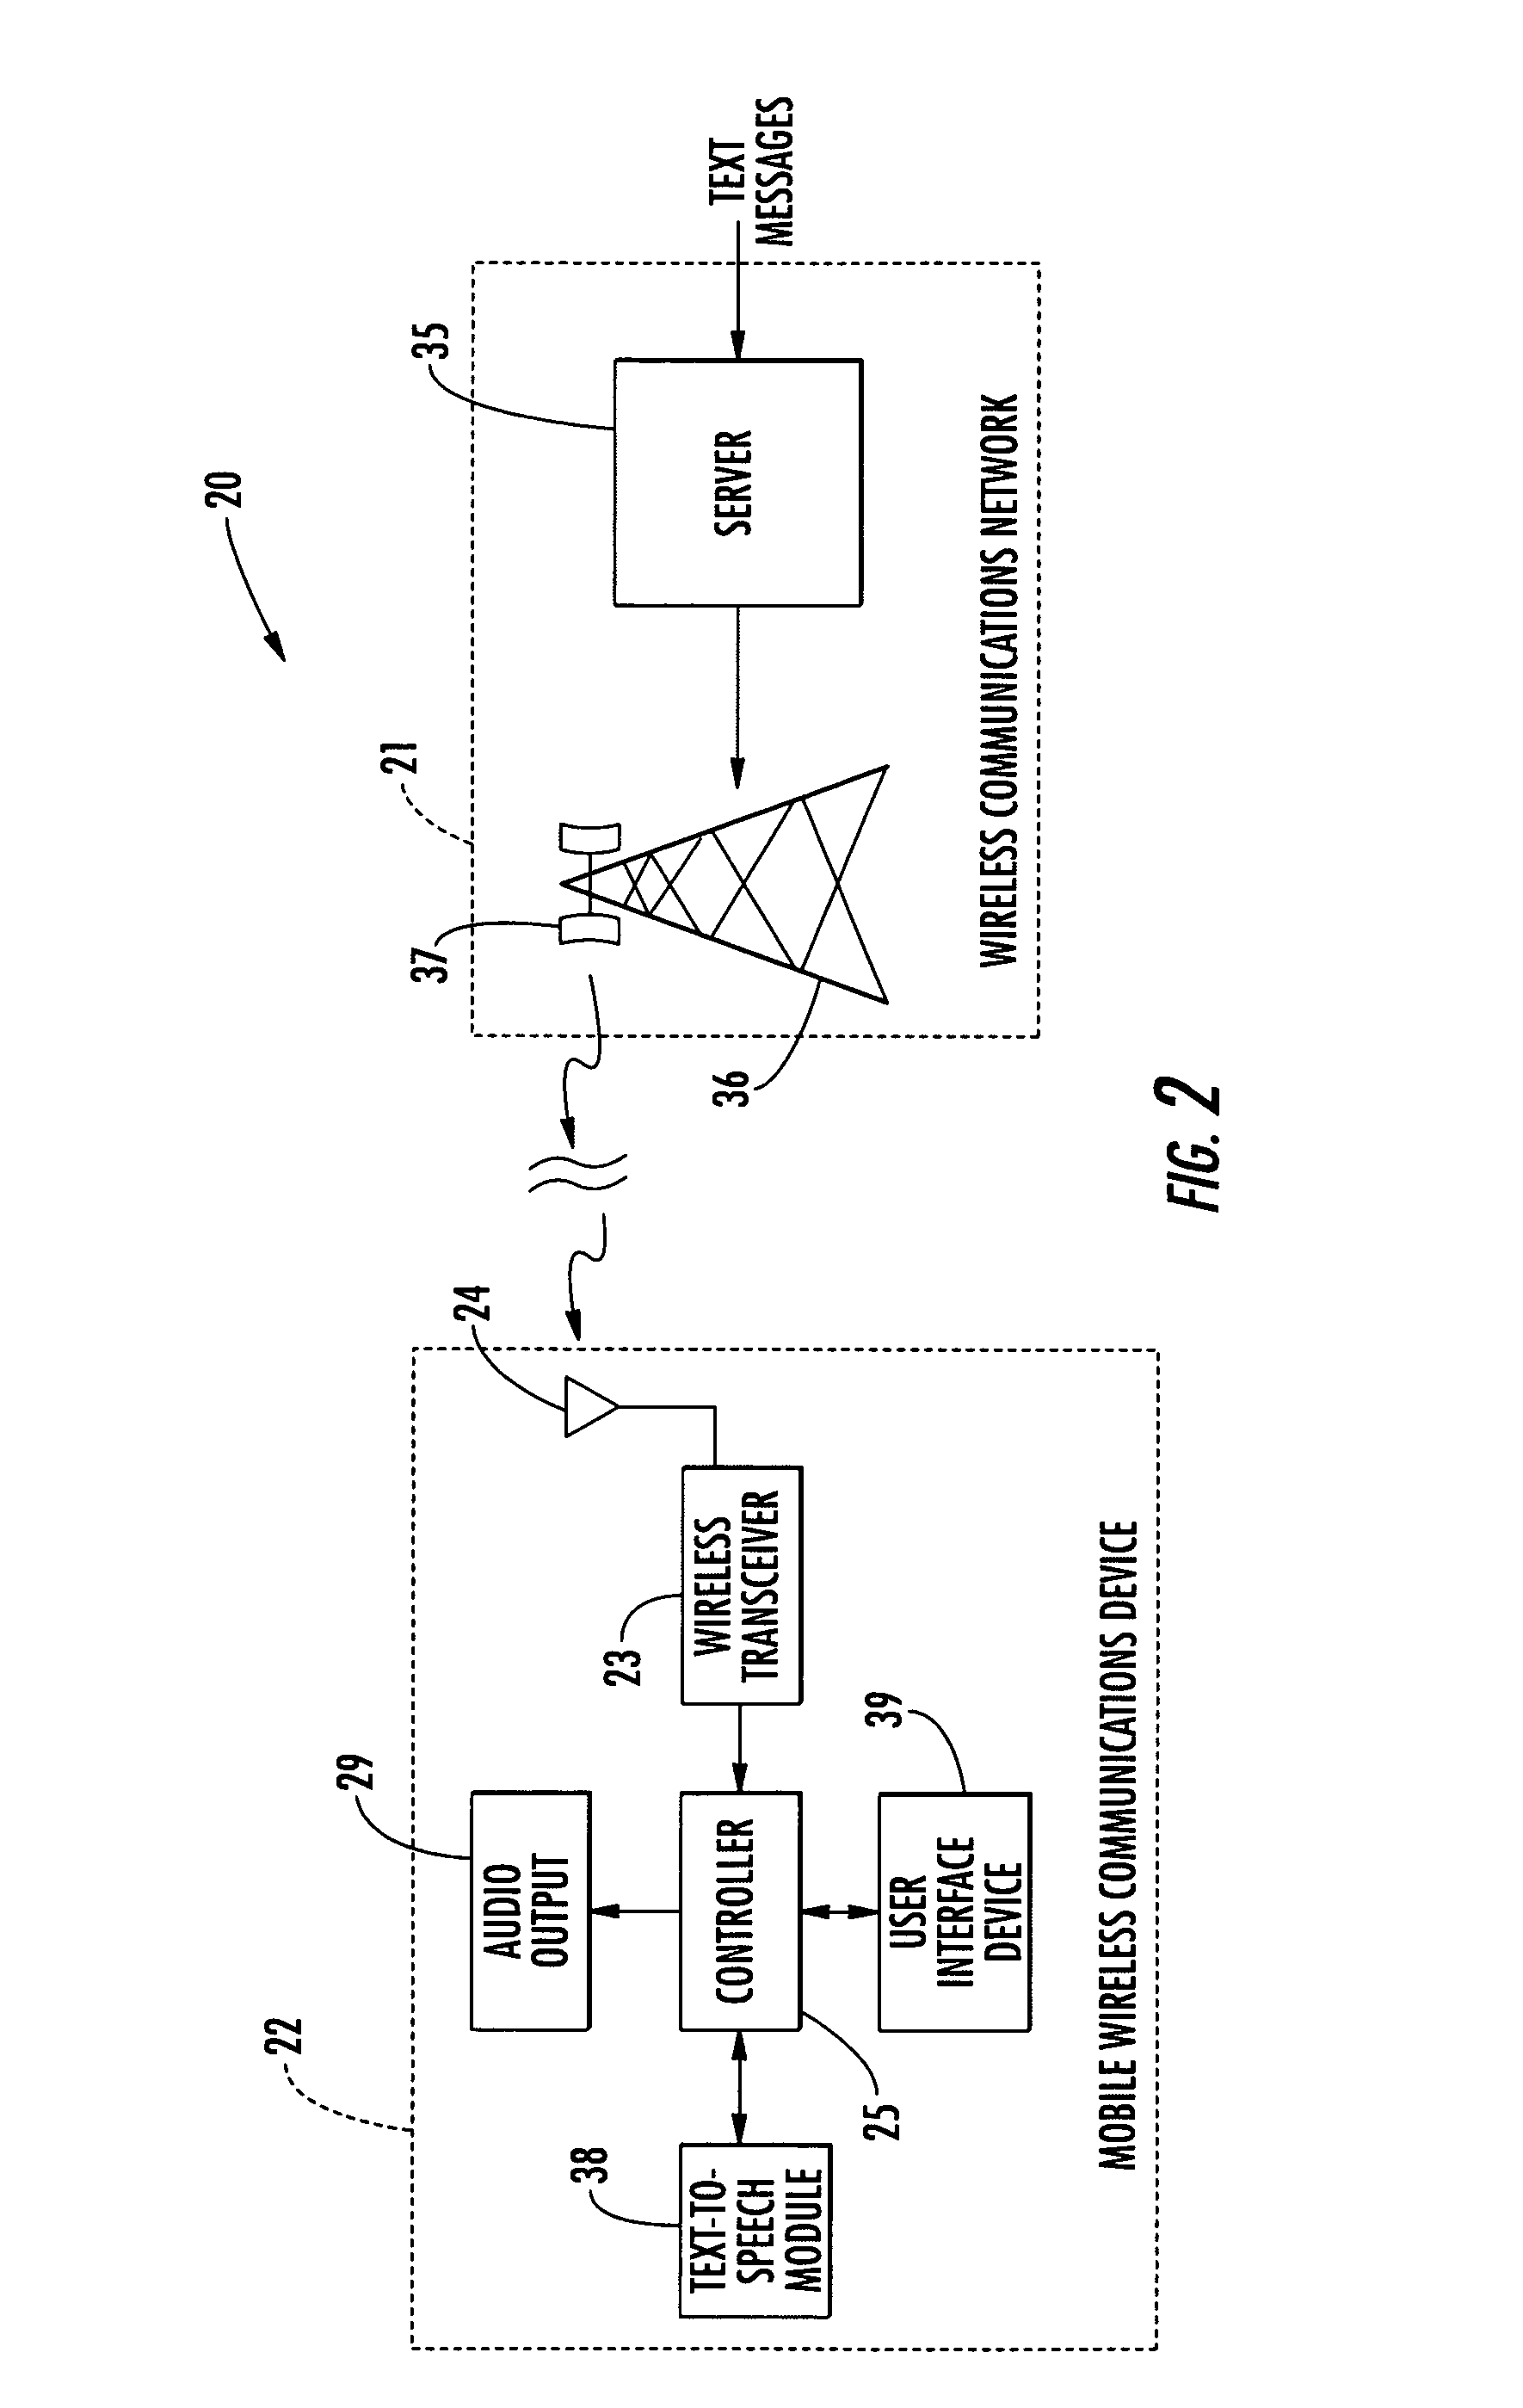 Communications system providing text-to-speech message conversion features using audio filter parameters and related methods